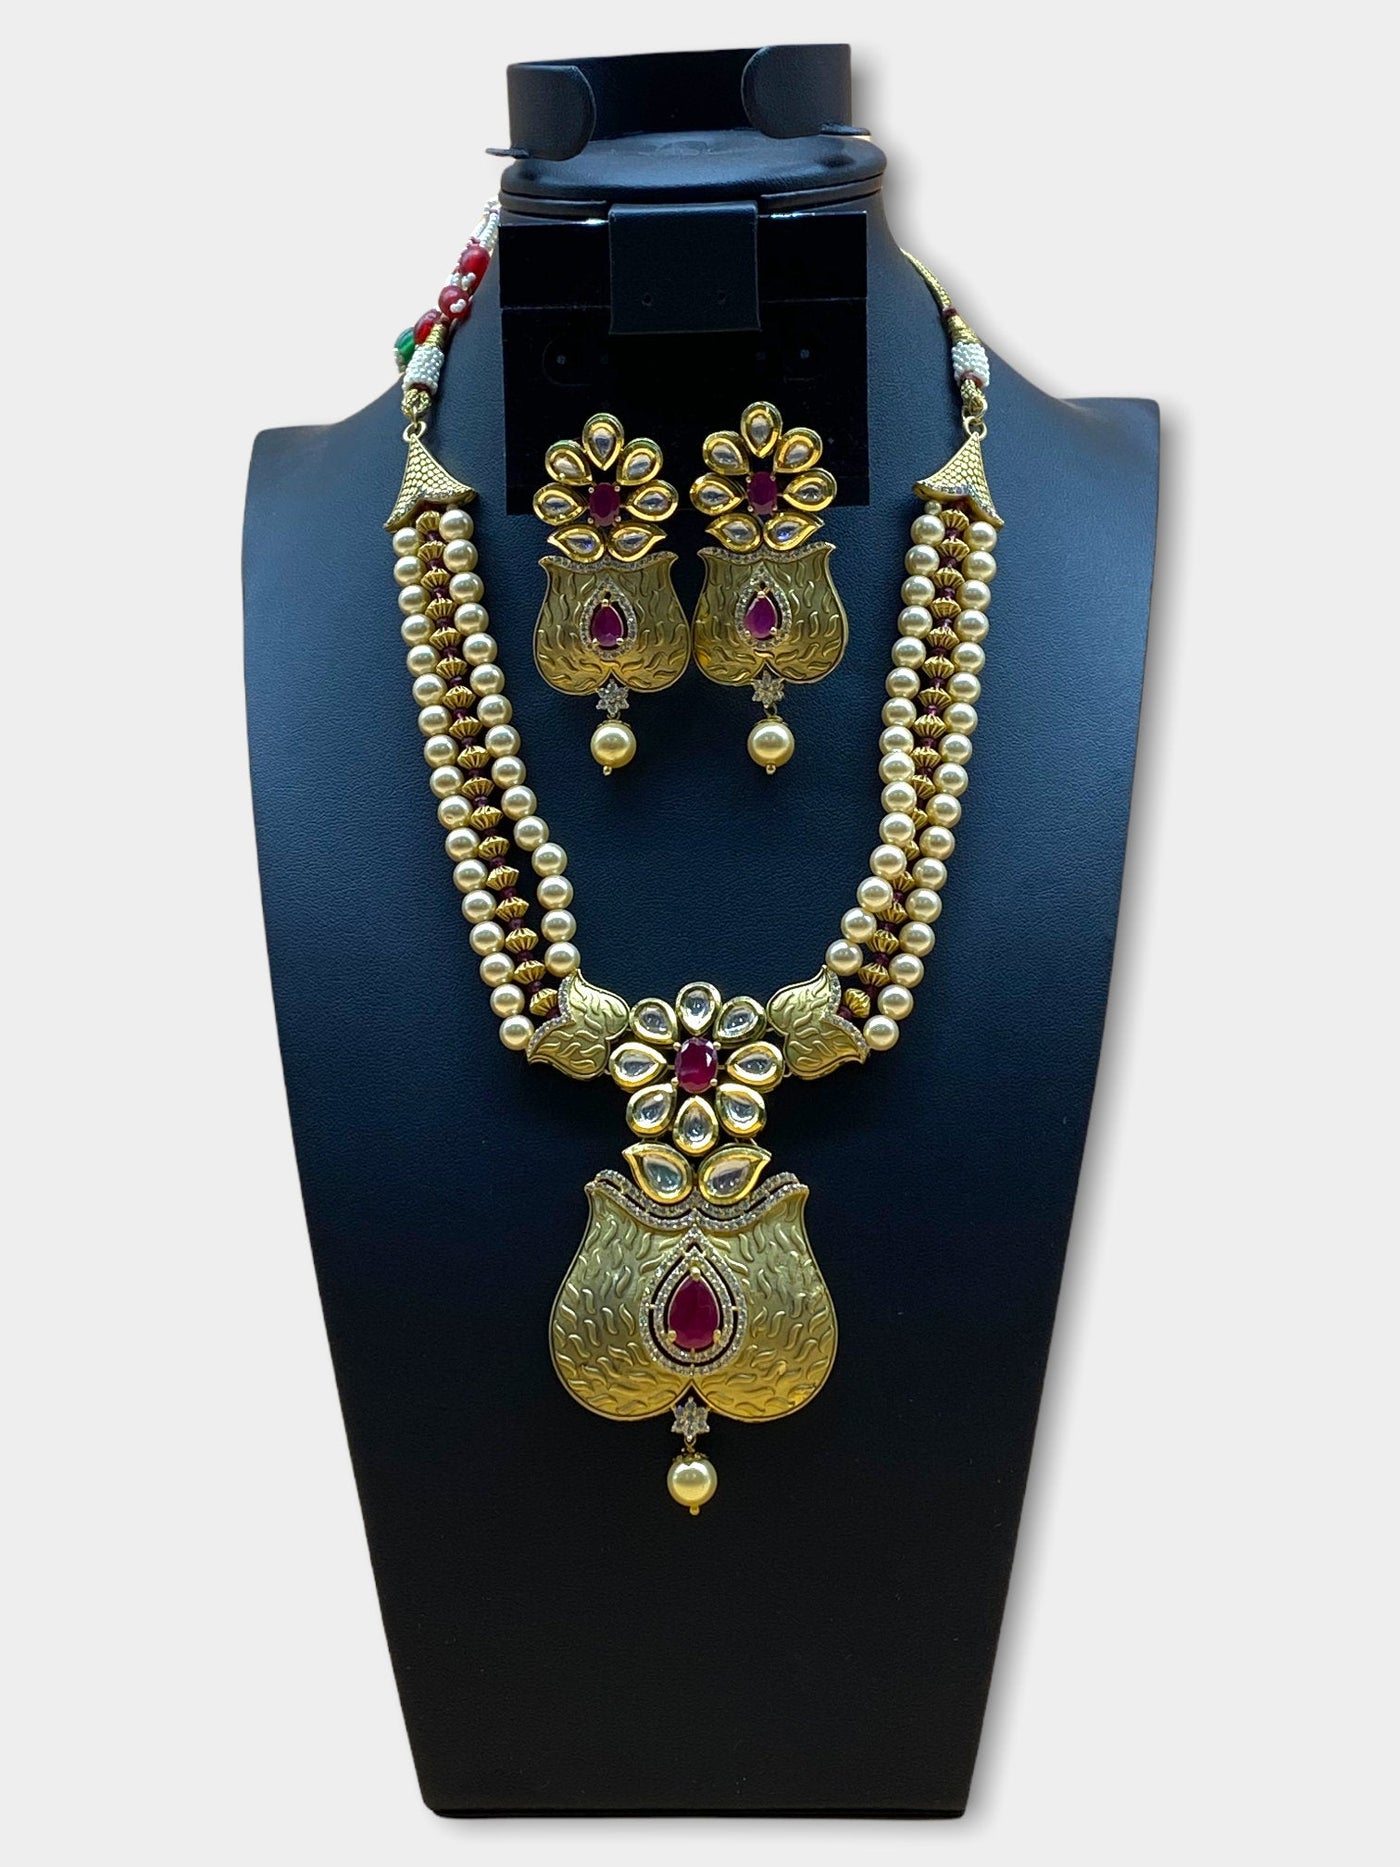 Gold Plated Pearl Stone Work Necklace Set - dba012